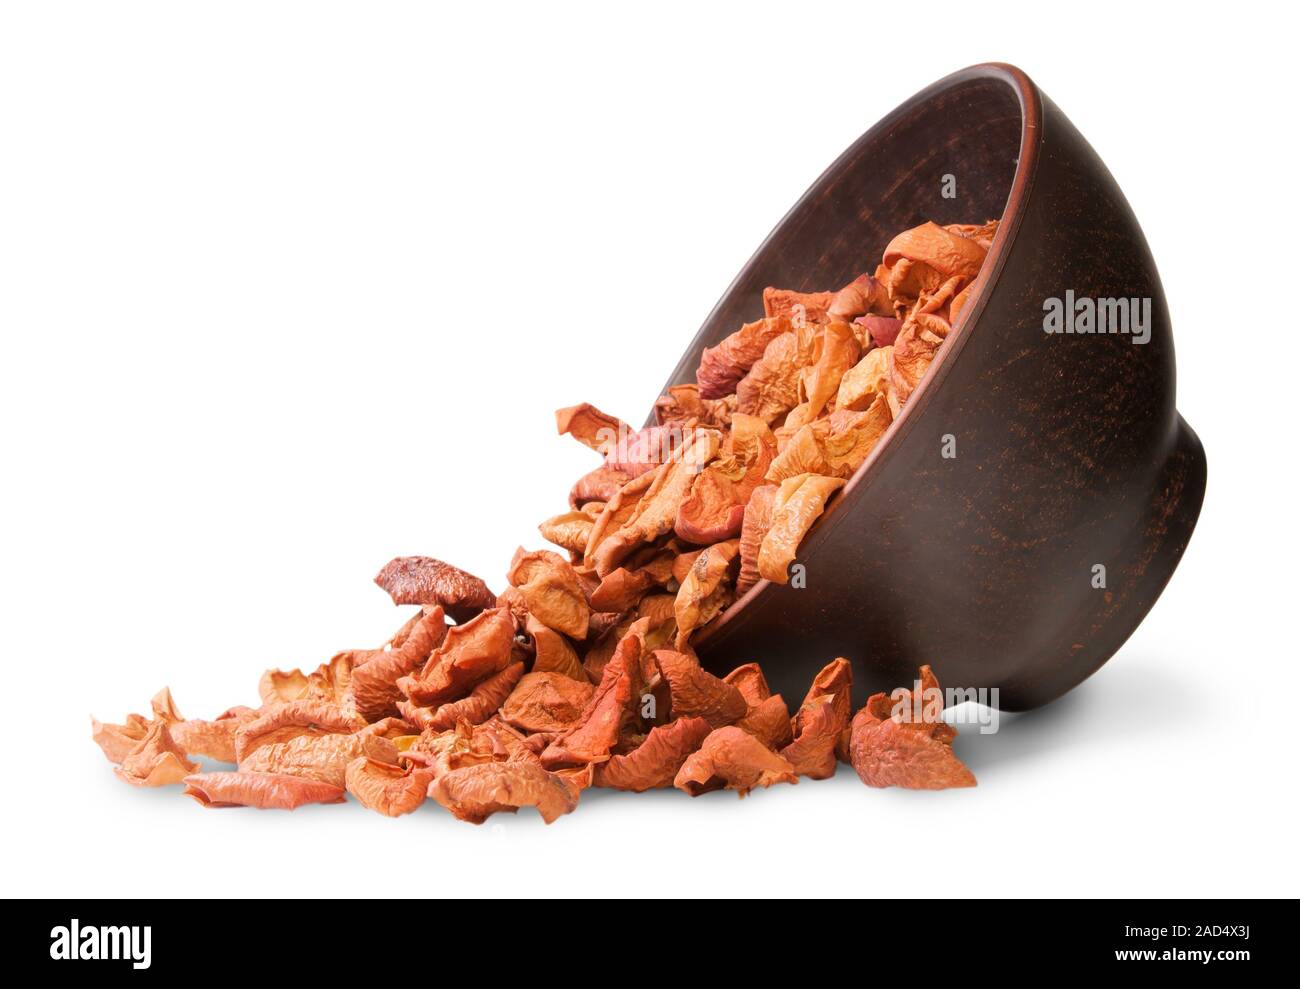 Dried Apples In The Inverted Ceramic Bowl Stock Photo